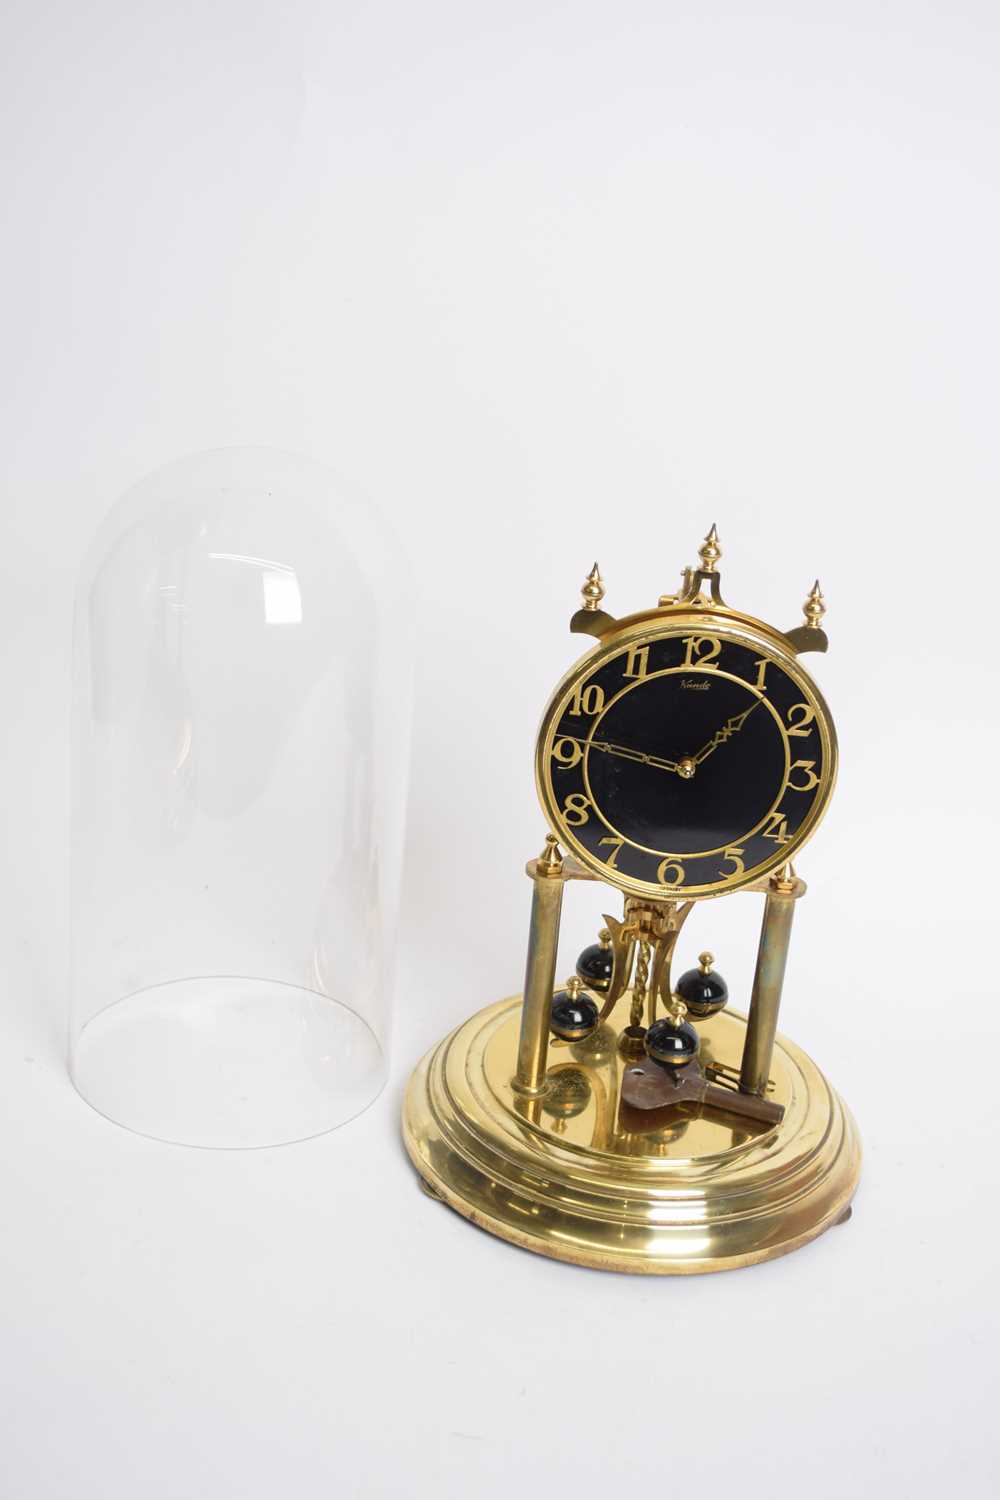 Kundo brass torsion or anniversary clock set under a glass dome, 30cm high - Image 2 of 3